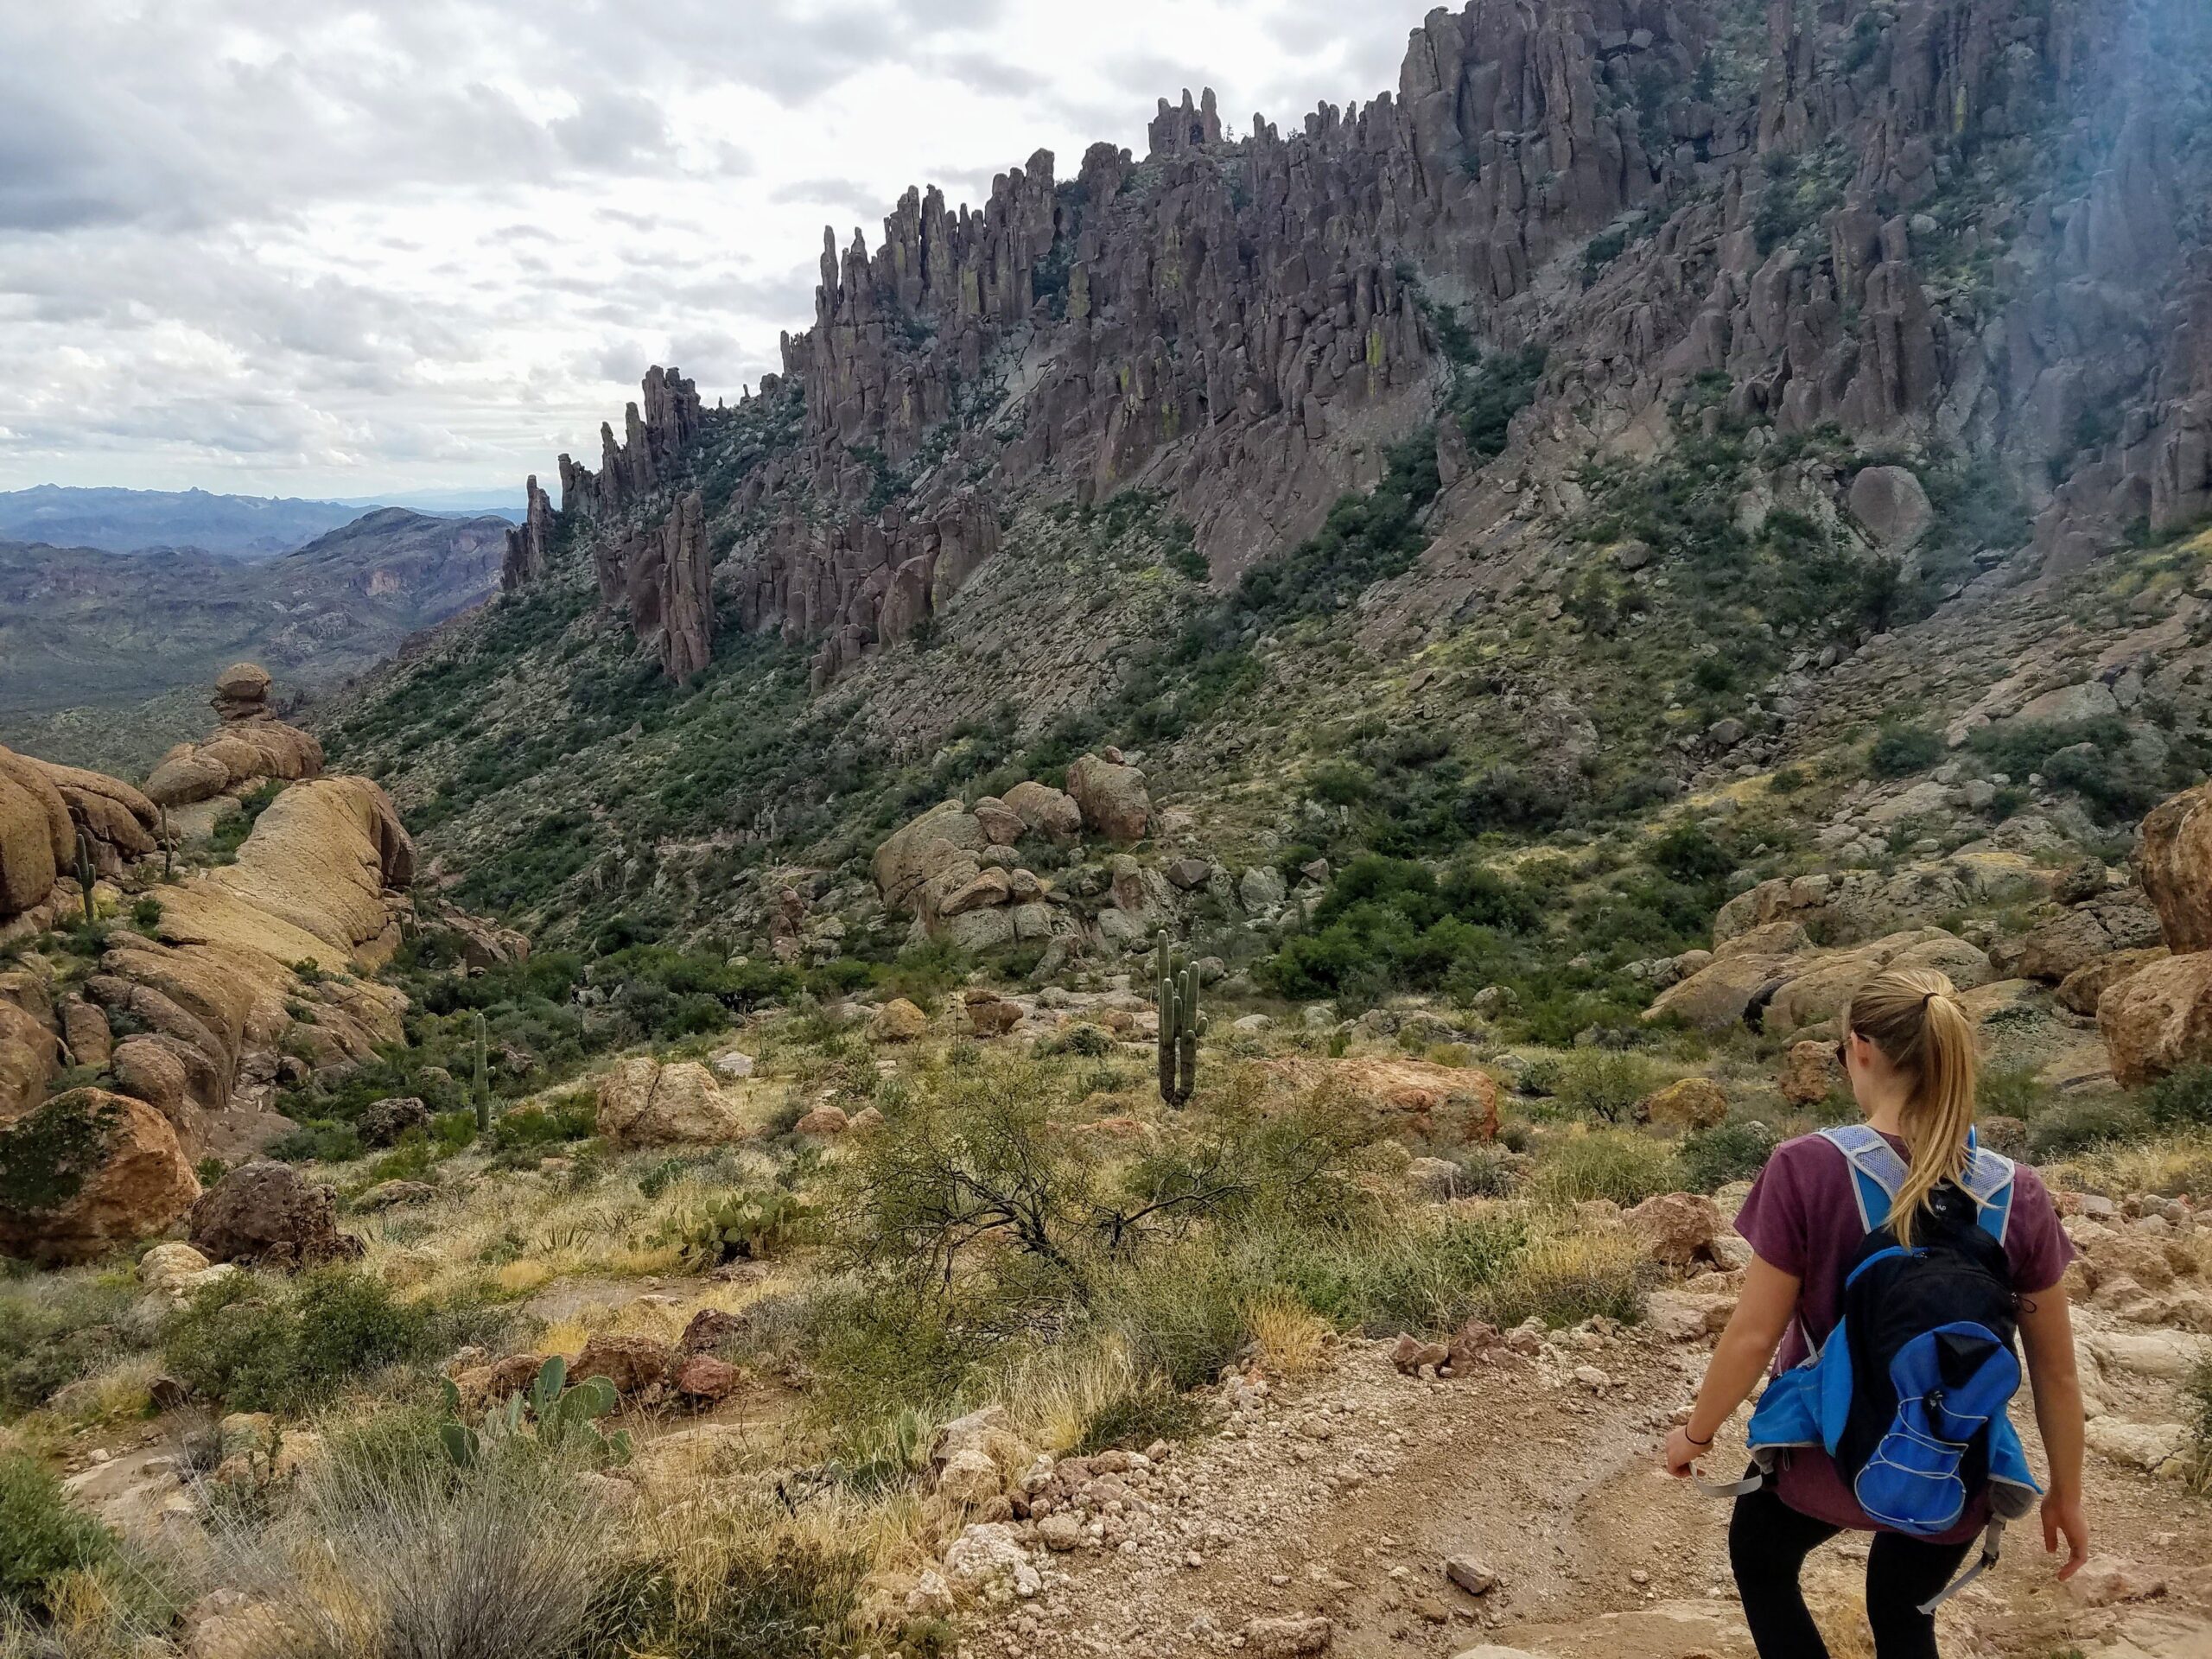 Hiking in Superstition Mountains